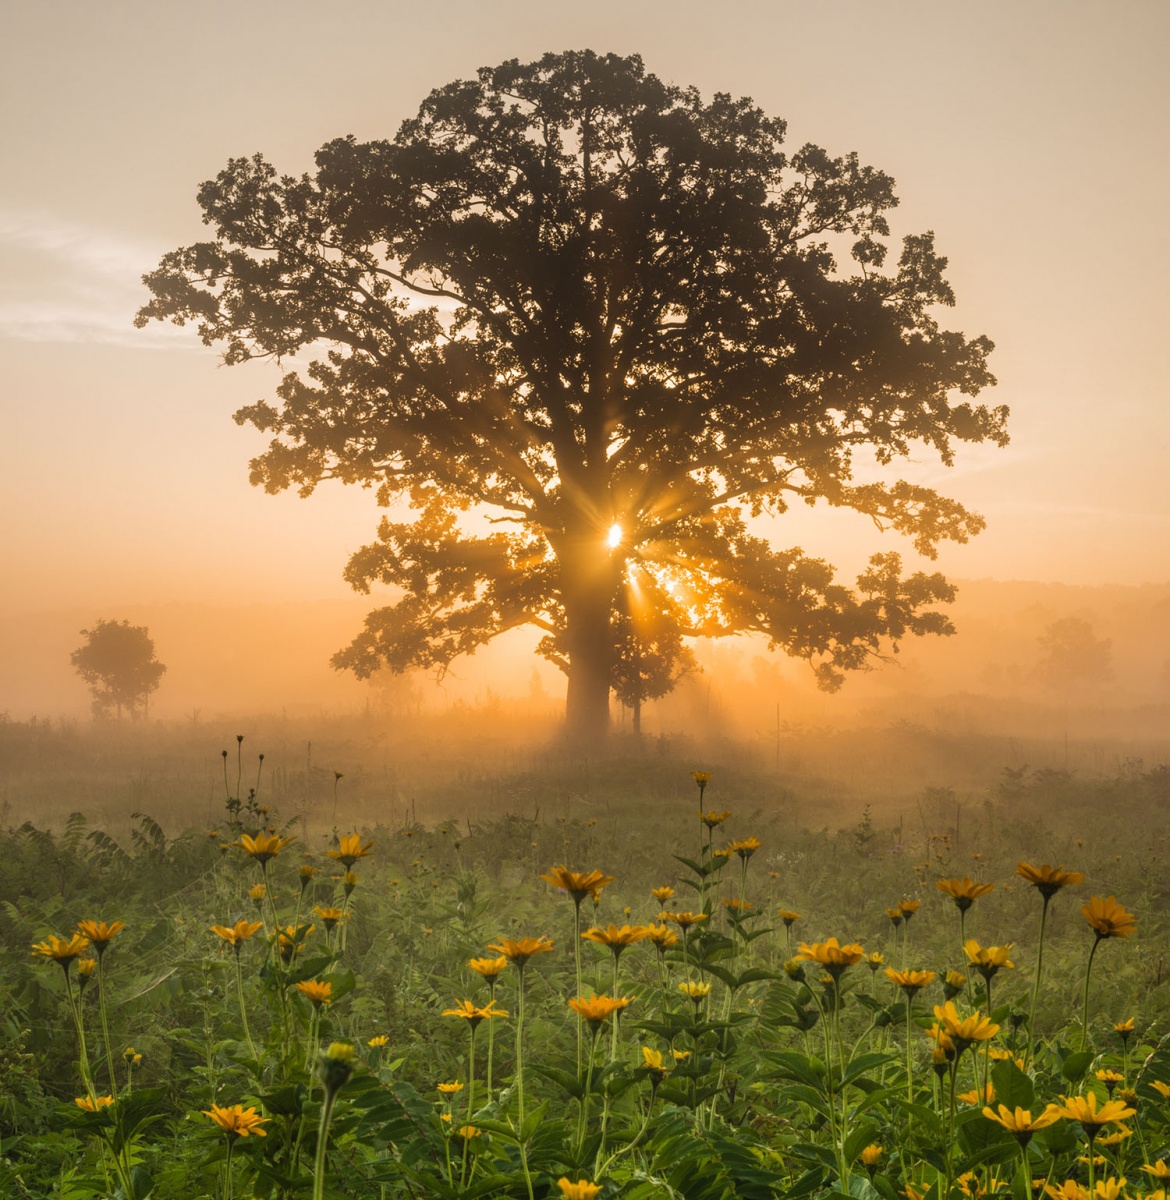 light streams through a tree in a field of yellow flowers